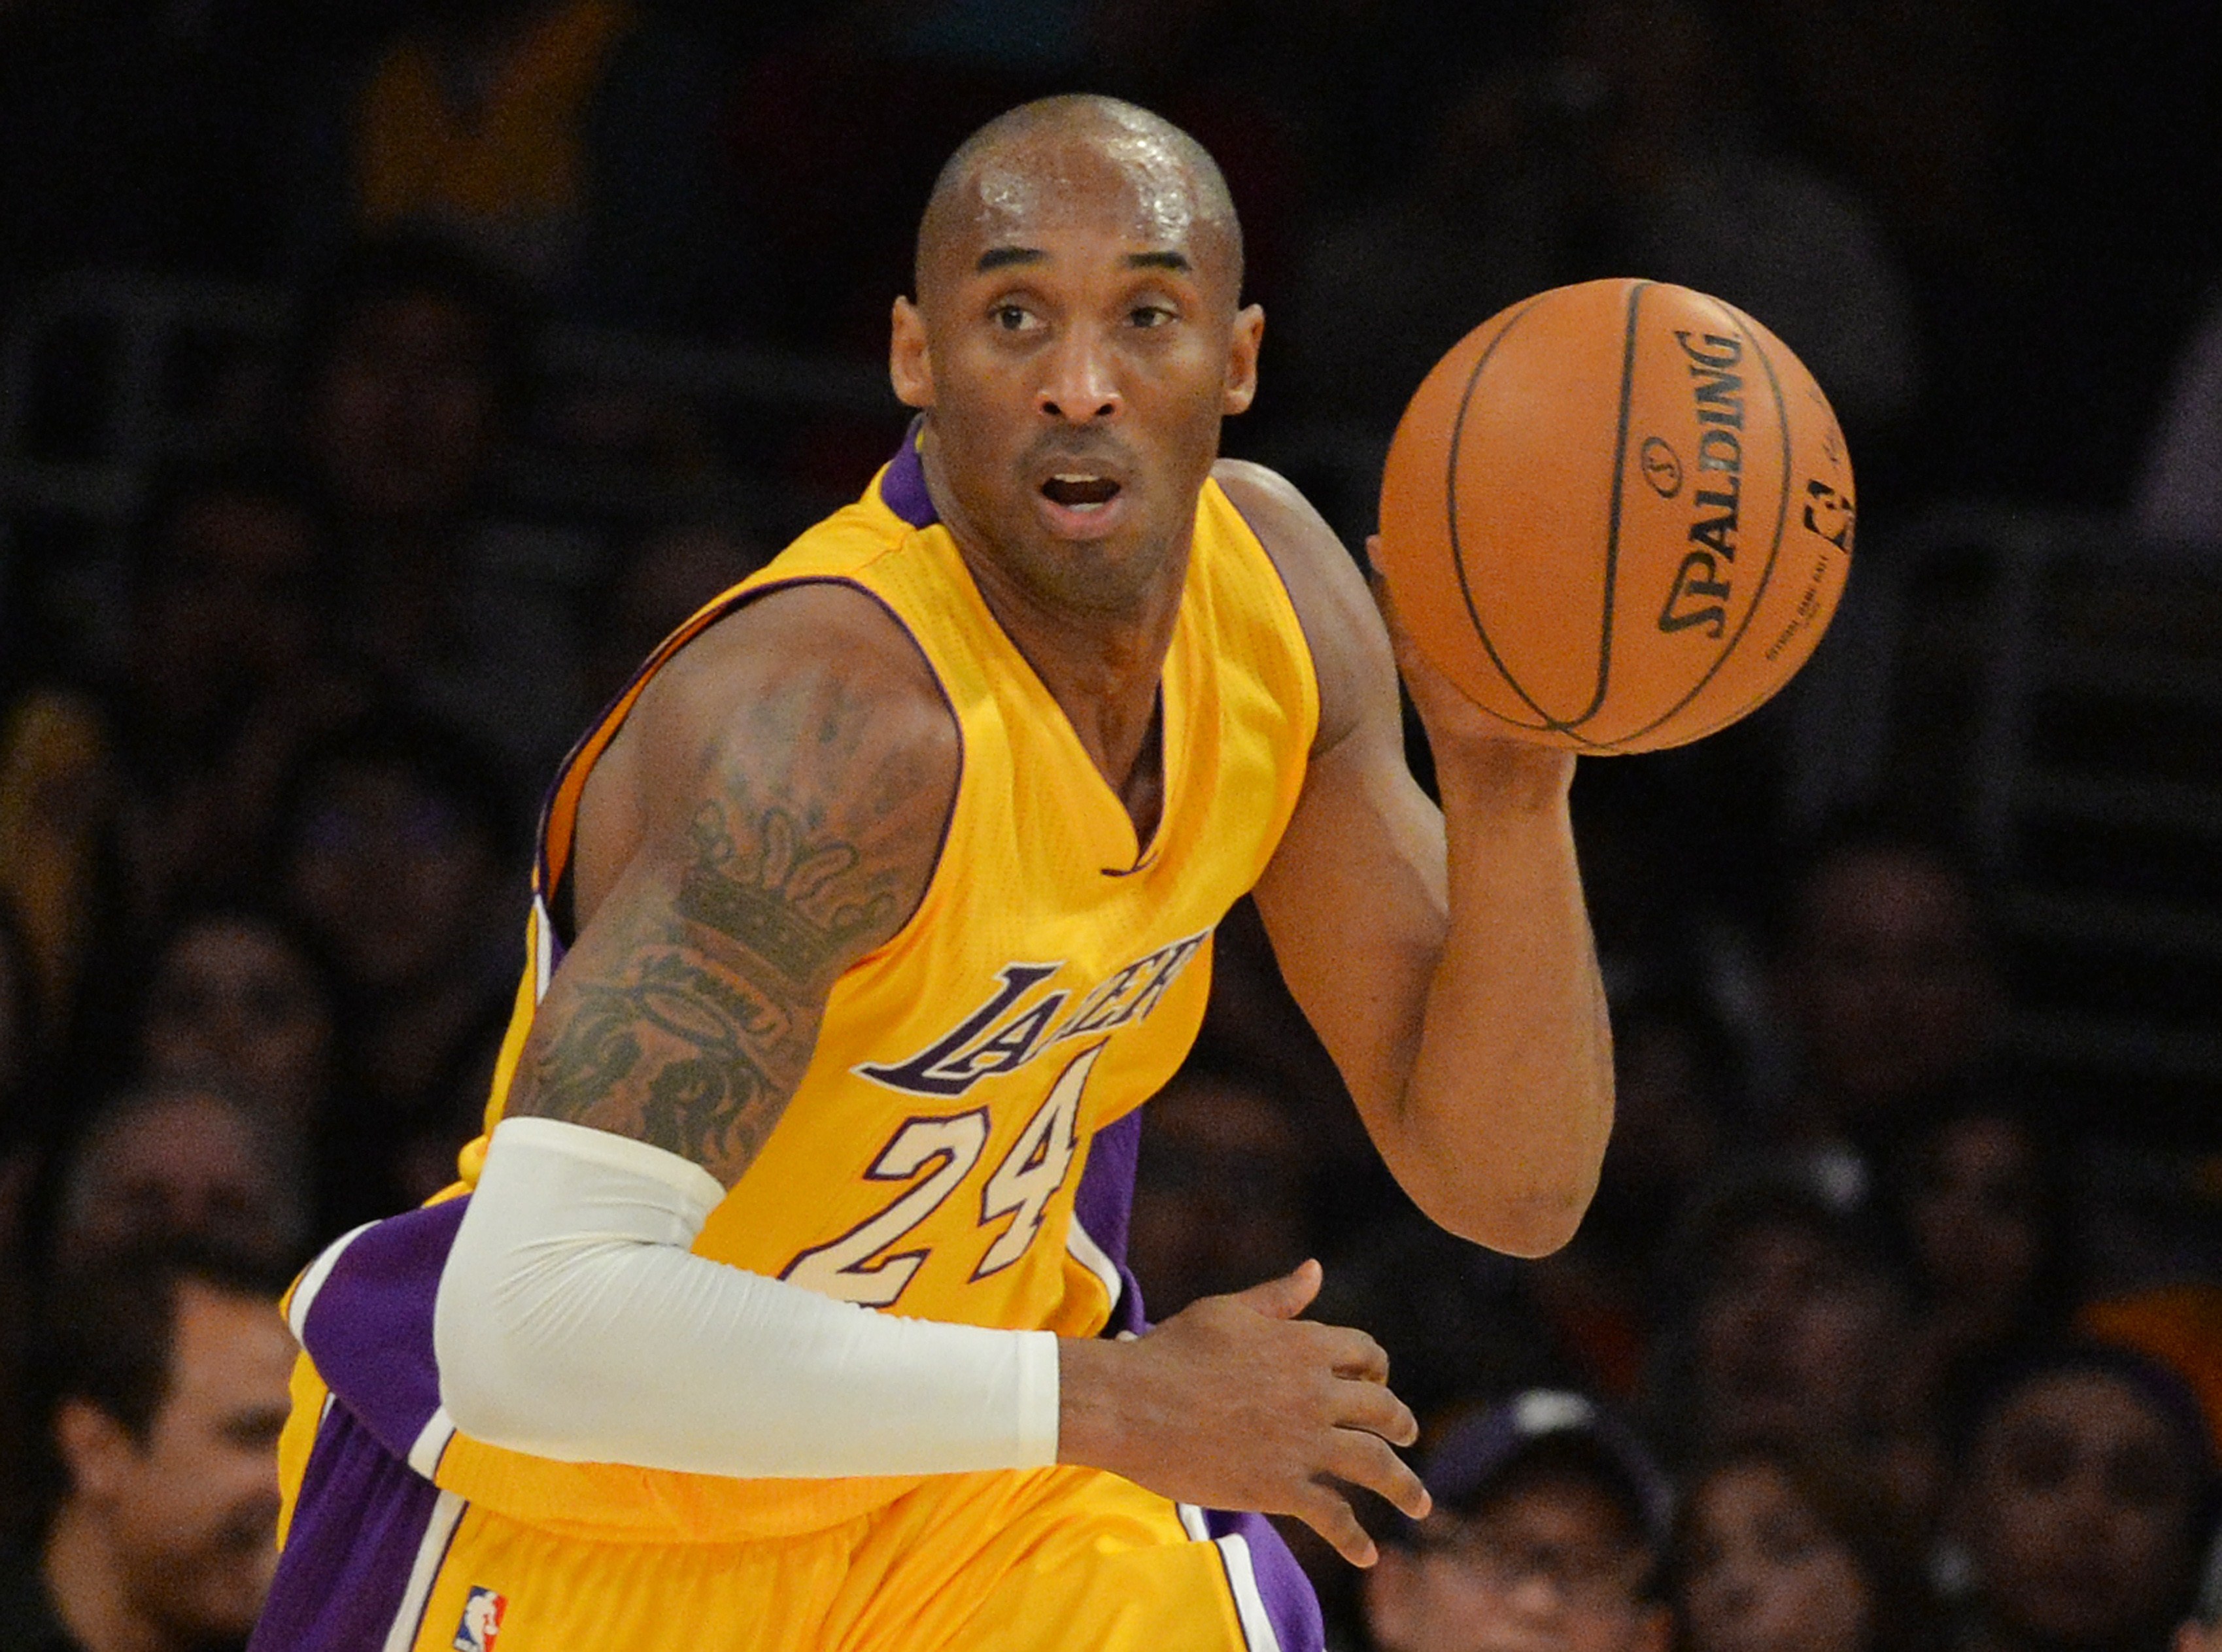 Kobe Bean Bryant - 24 facts about amazing Kobe Bryant - Pictures - CBS News3398 x 2527